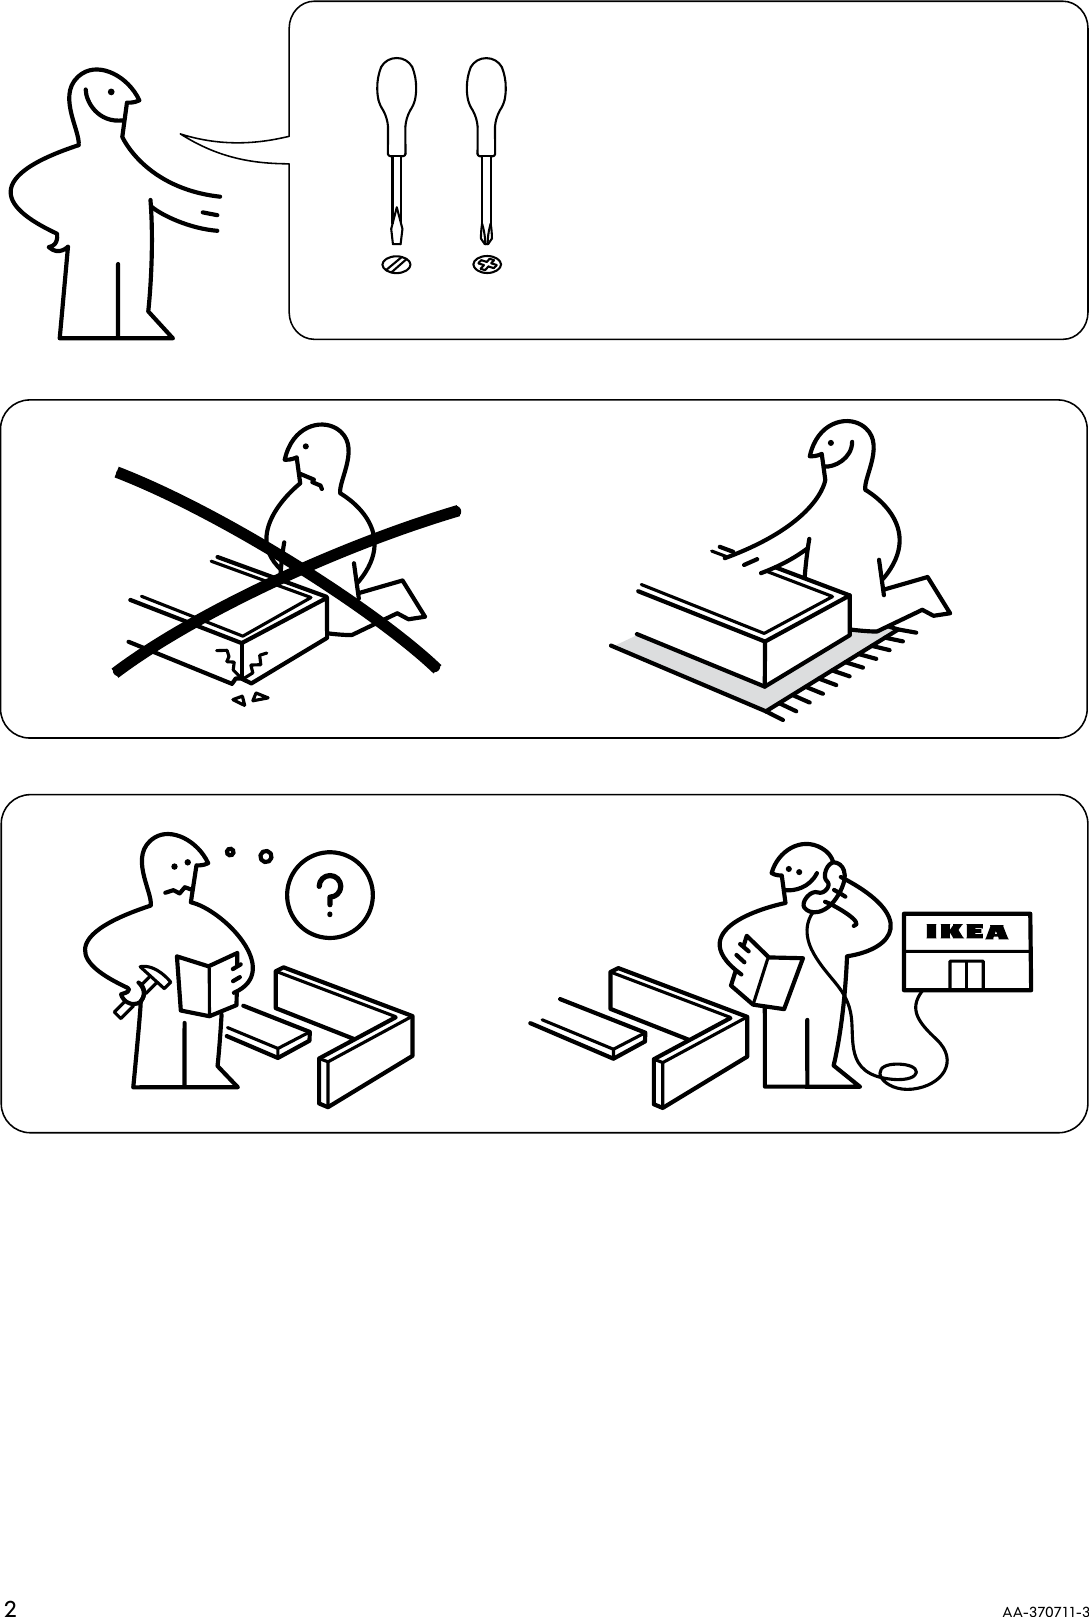 Ikea Poang Rocking Chair Frame Assembly Instruction